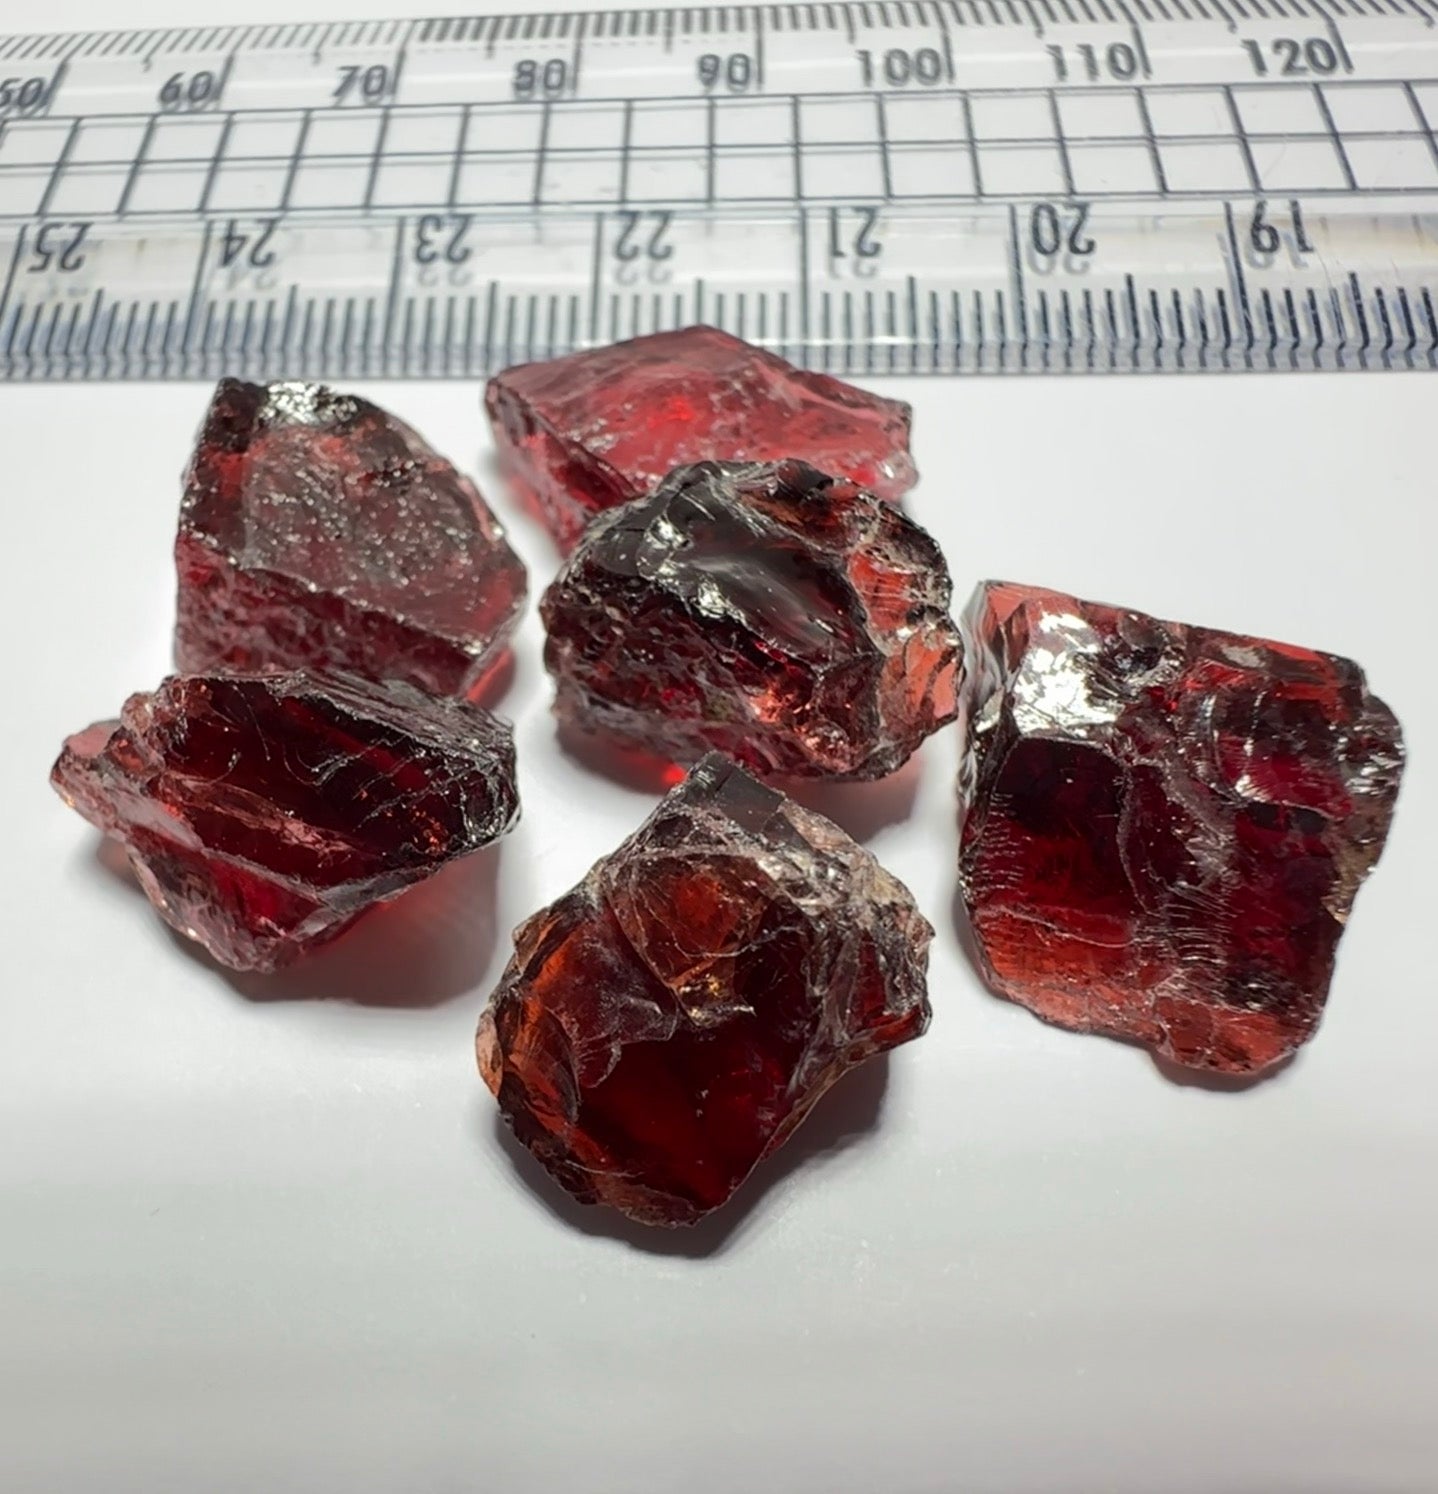 86.12Ct Red Garnet Lot 11.19Ct - 16.13Ct Clean With Slight Inclusions On The Outside